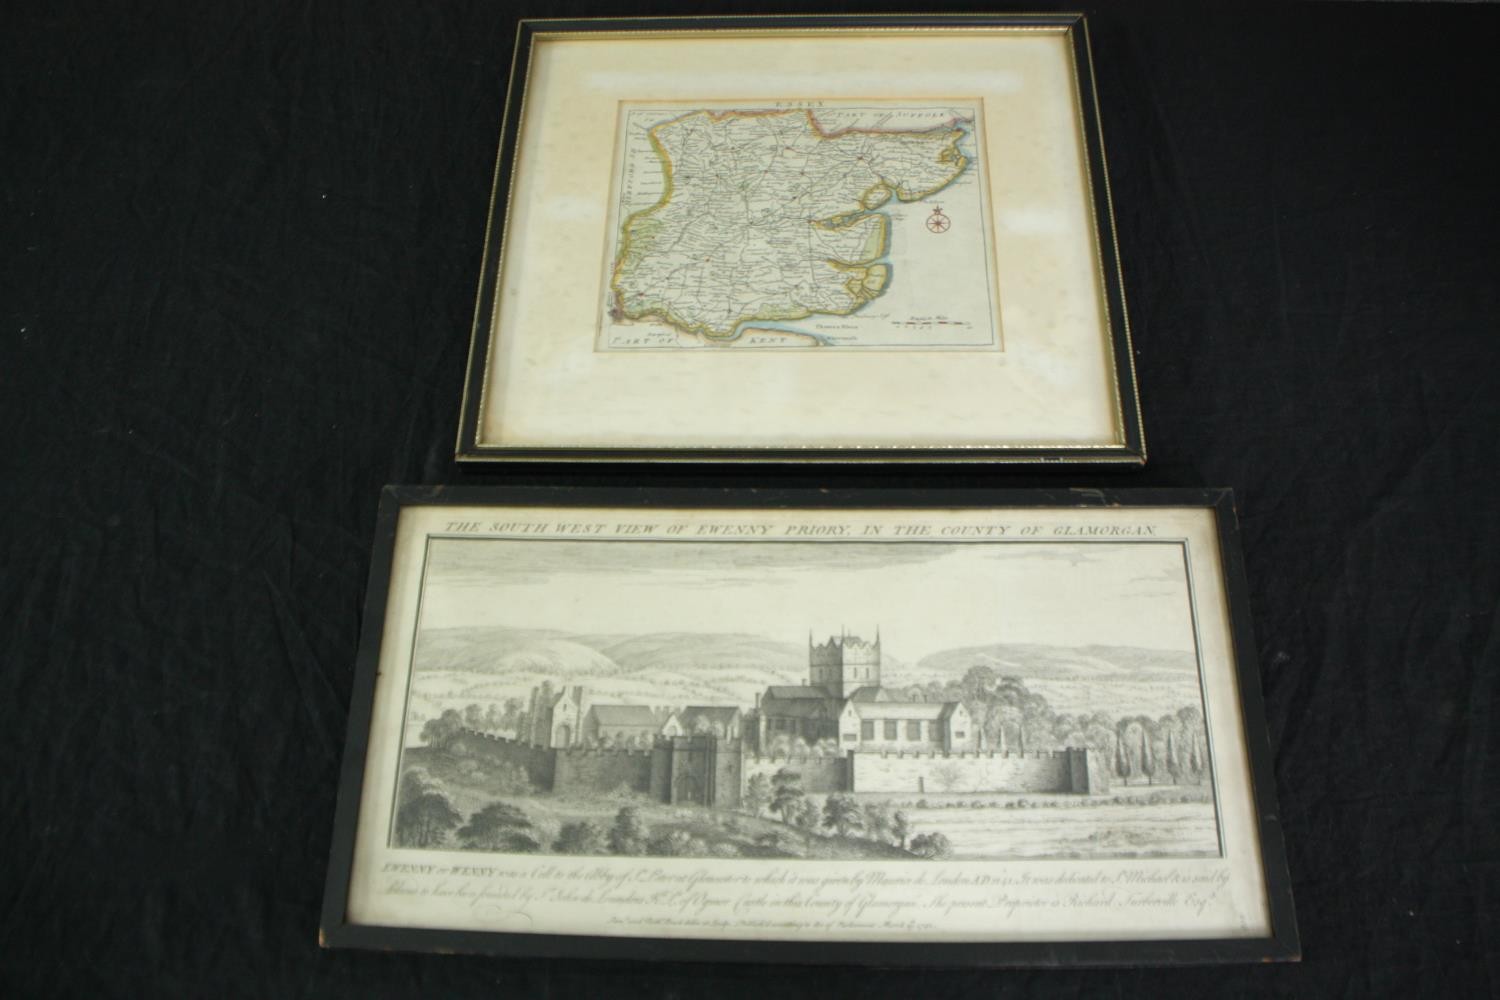 A hand coloured etched map of Essex by John Rocque. Dated 'circa 1750' on the reverse of the frame